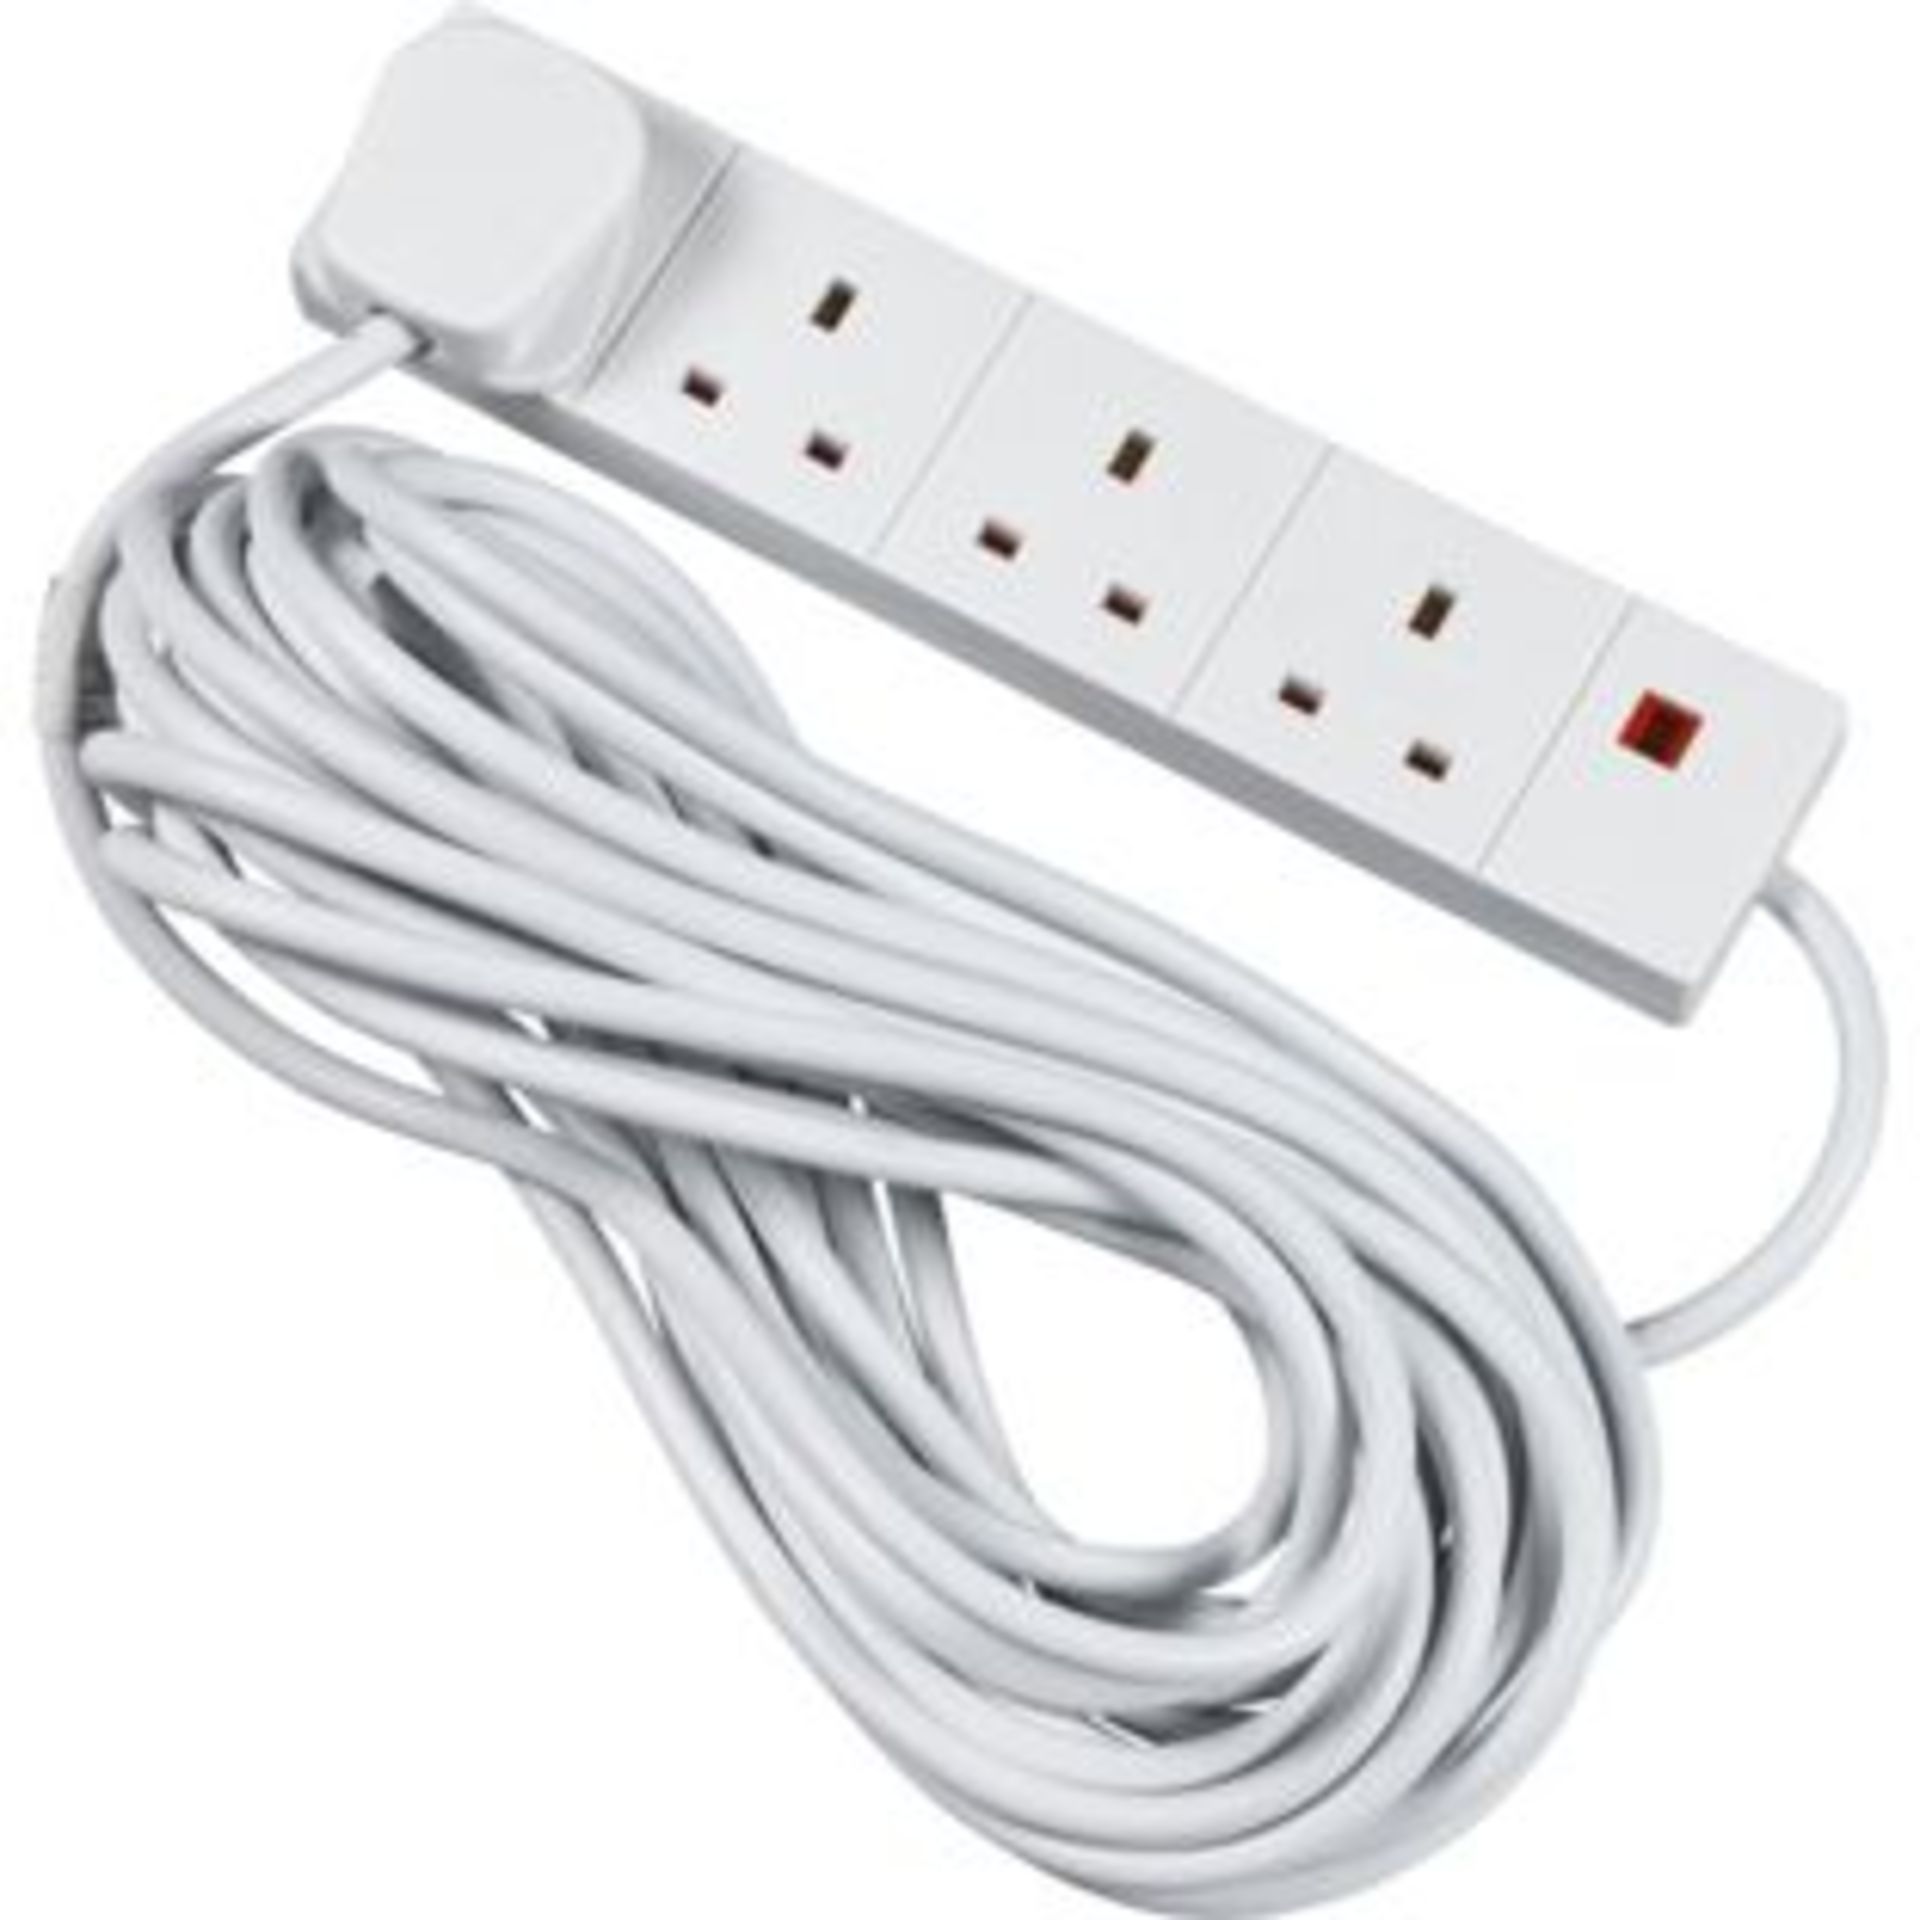 V Brand New 13A 4 Way Extension Lead with Approx 10m Cable RRP £14.99 X 2 YOUR BID PRICE TO BE